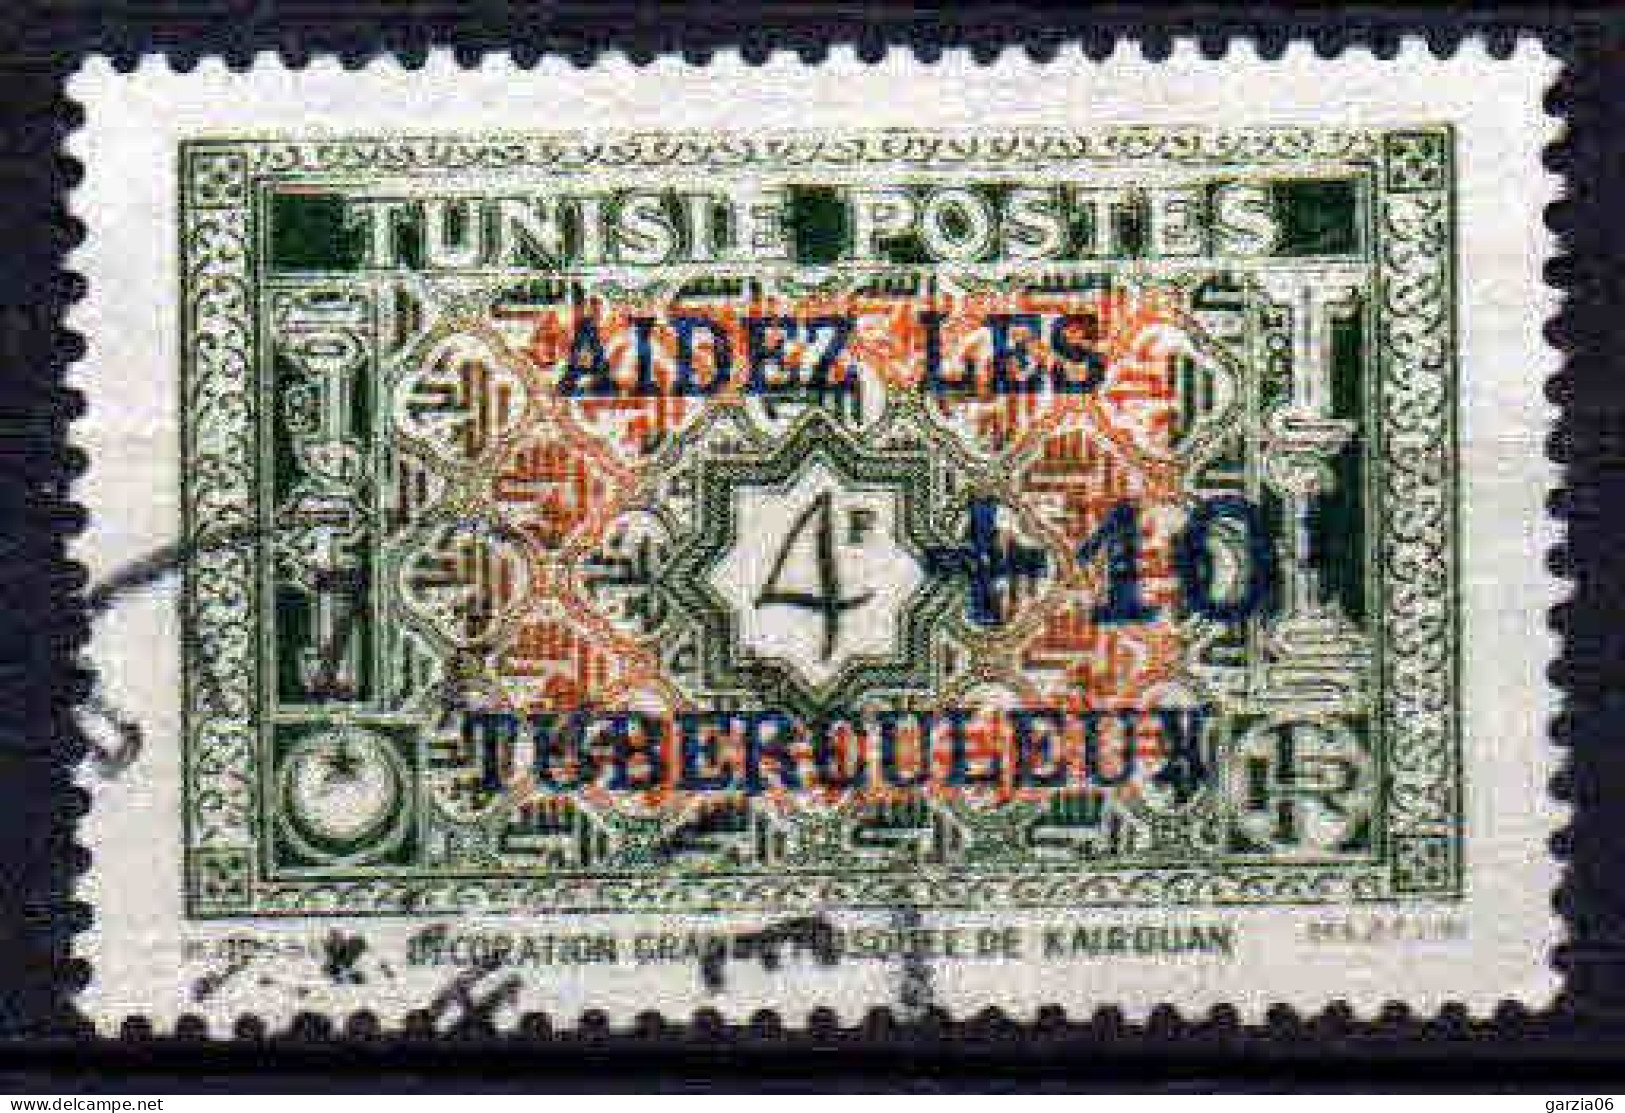 Tunisie  - 1948 -  Aide Aux Tuberculeux - N° 325 - Oblit - Used - Used Stamps